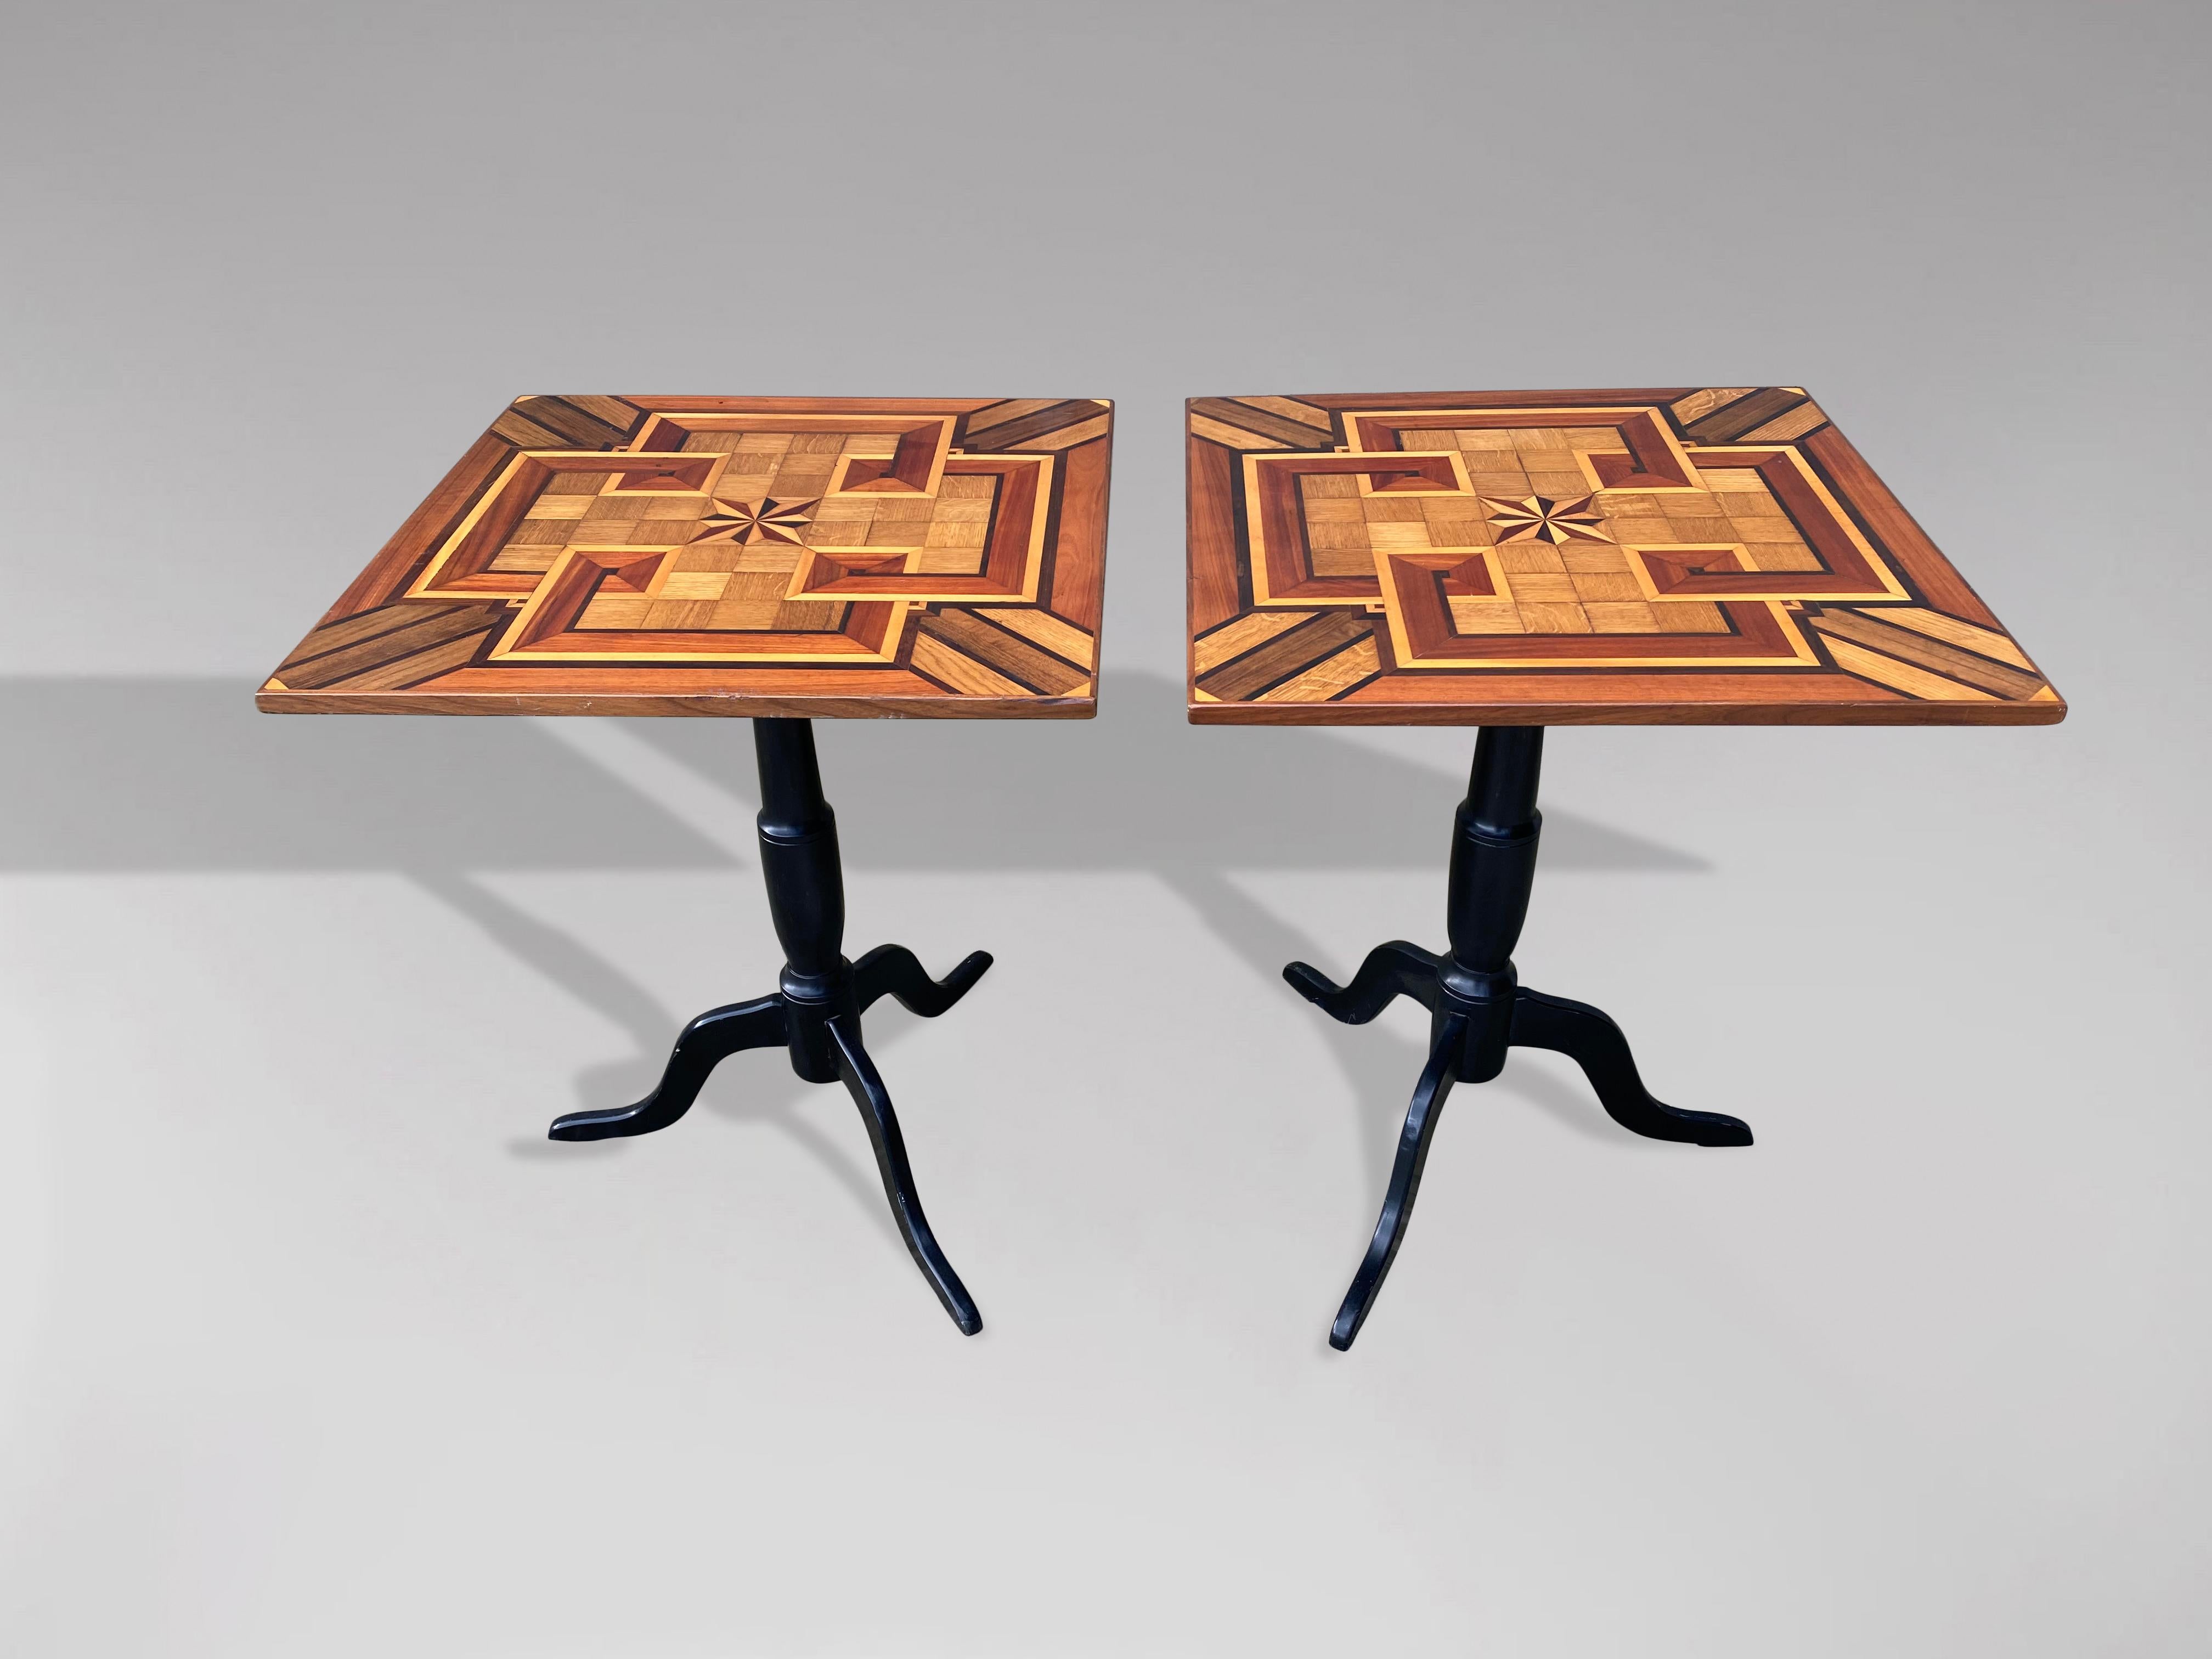 A fine pair of 19th century geometric parquetry inlay and marquetry square top occasional tables standing on the original black painted tripod base. Amazing quality!

The dimensions are:
Height: 75cm (29.5in)
Width: 61cm (24.0in)
Depth: 61cm (24.0in)